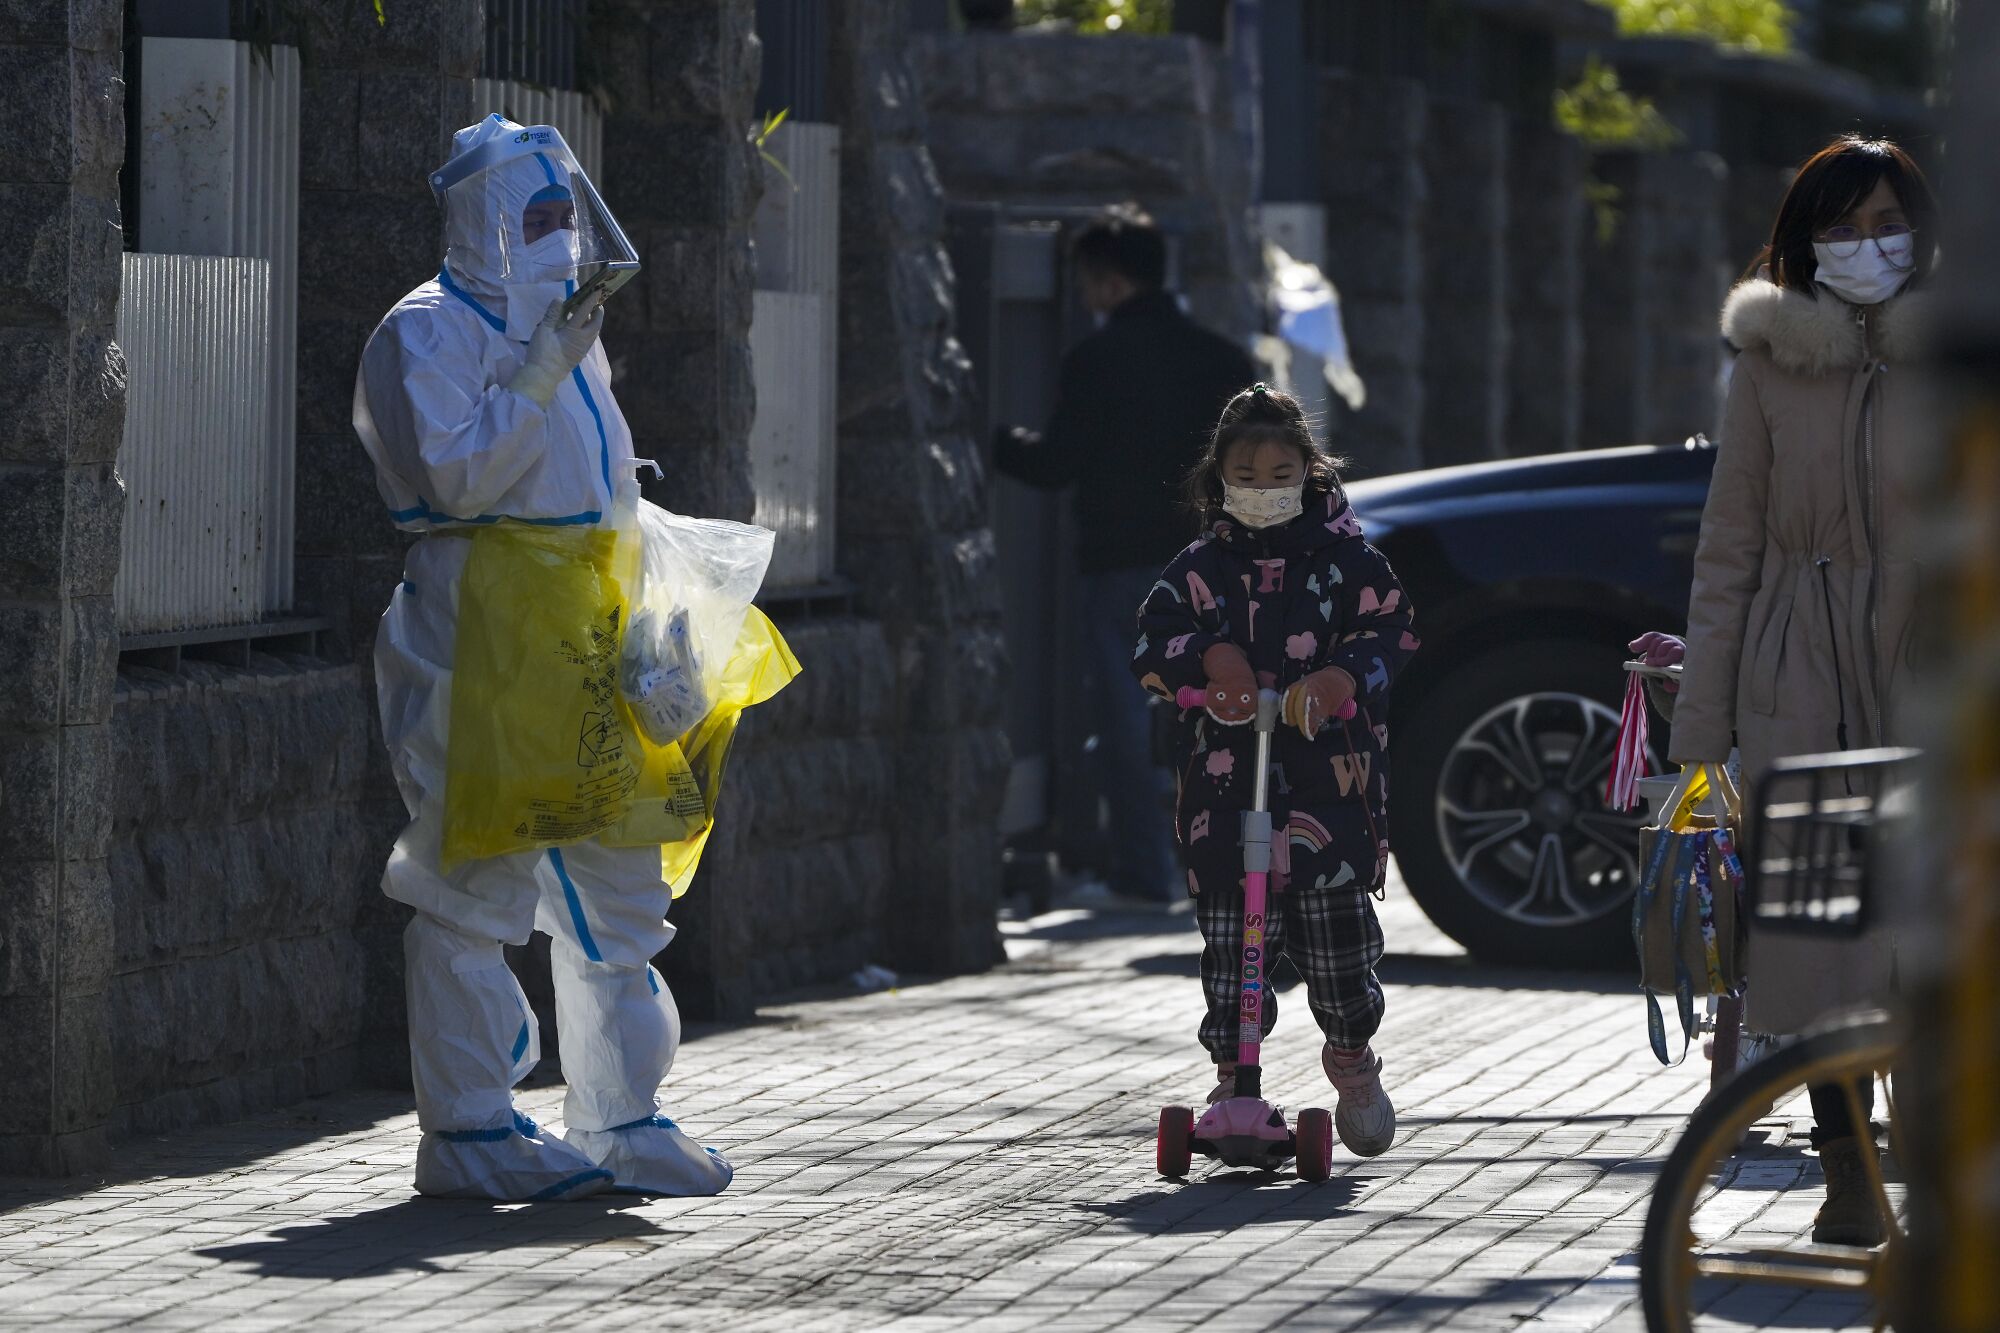 A child wearing a face mask and riding on a scooter passes by a worker in protective suit